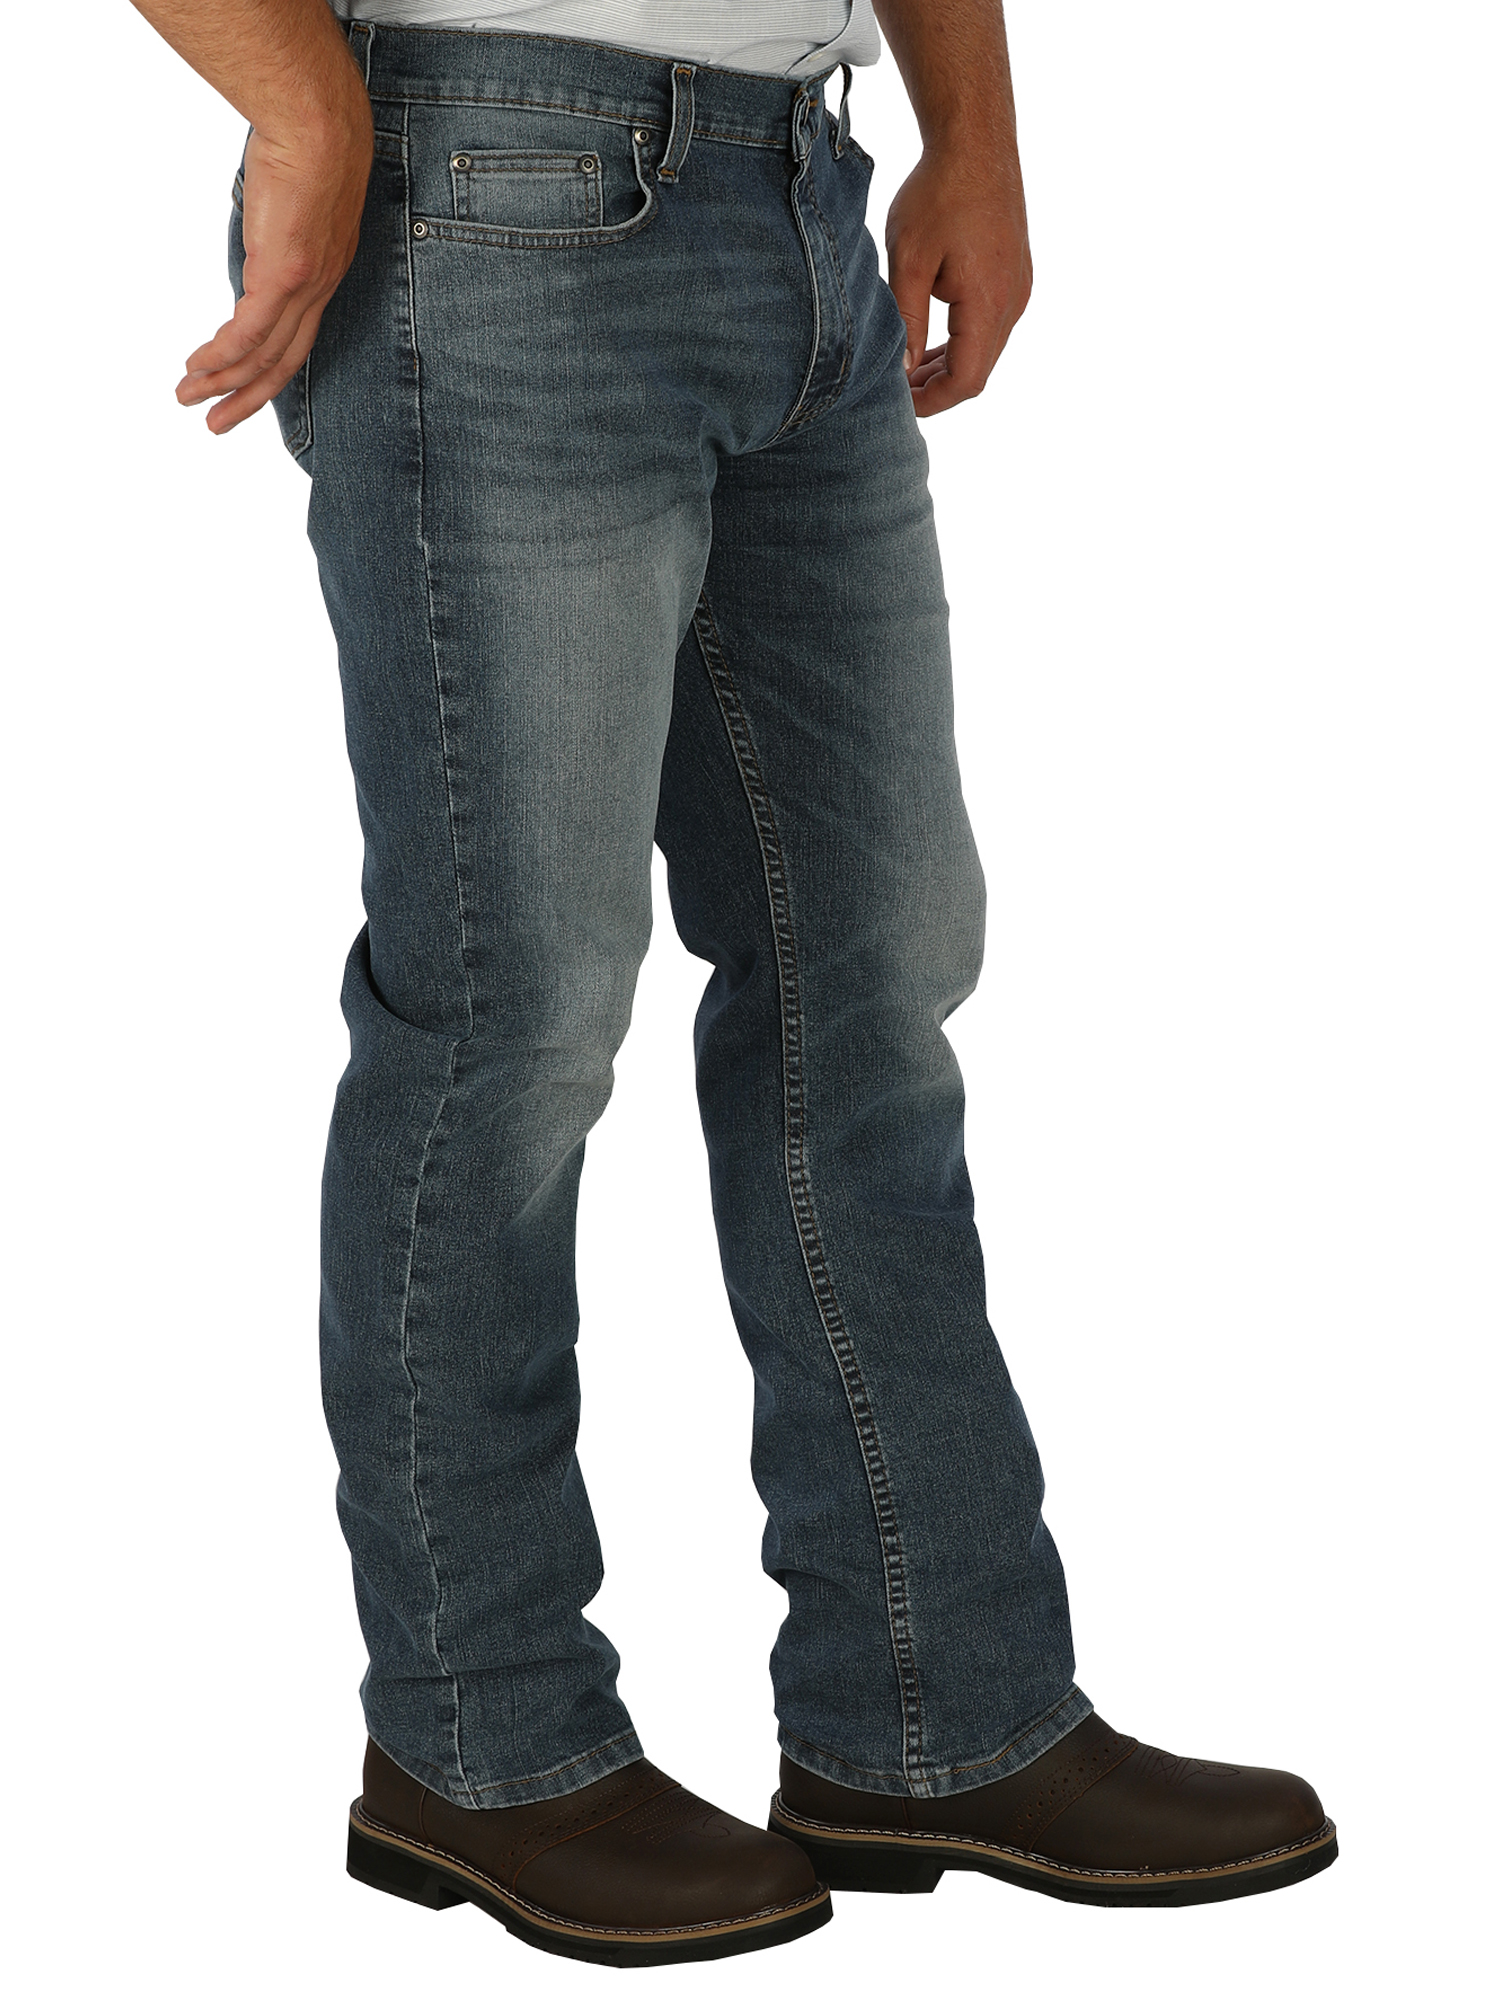 George Men's Bootcut Jeans - image 4 of 5